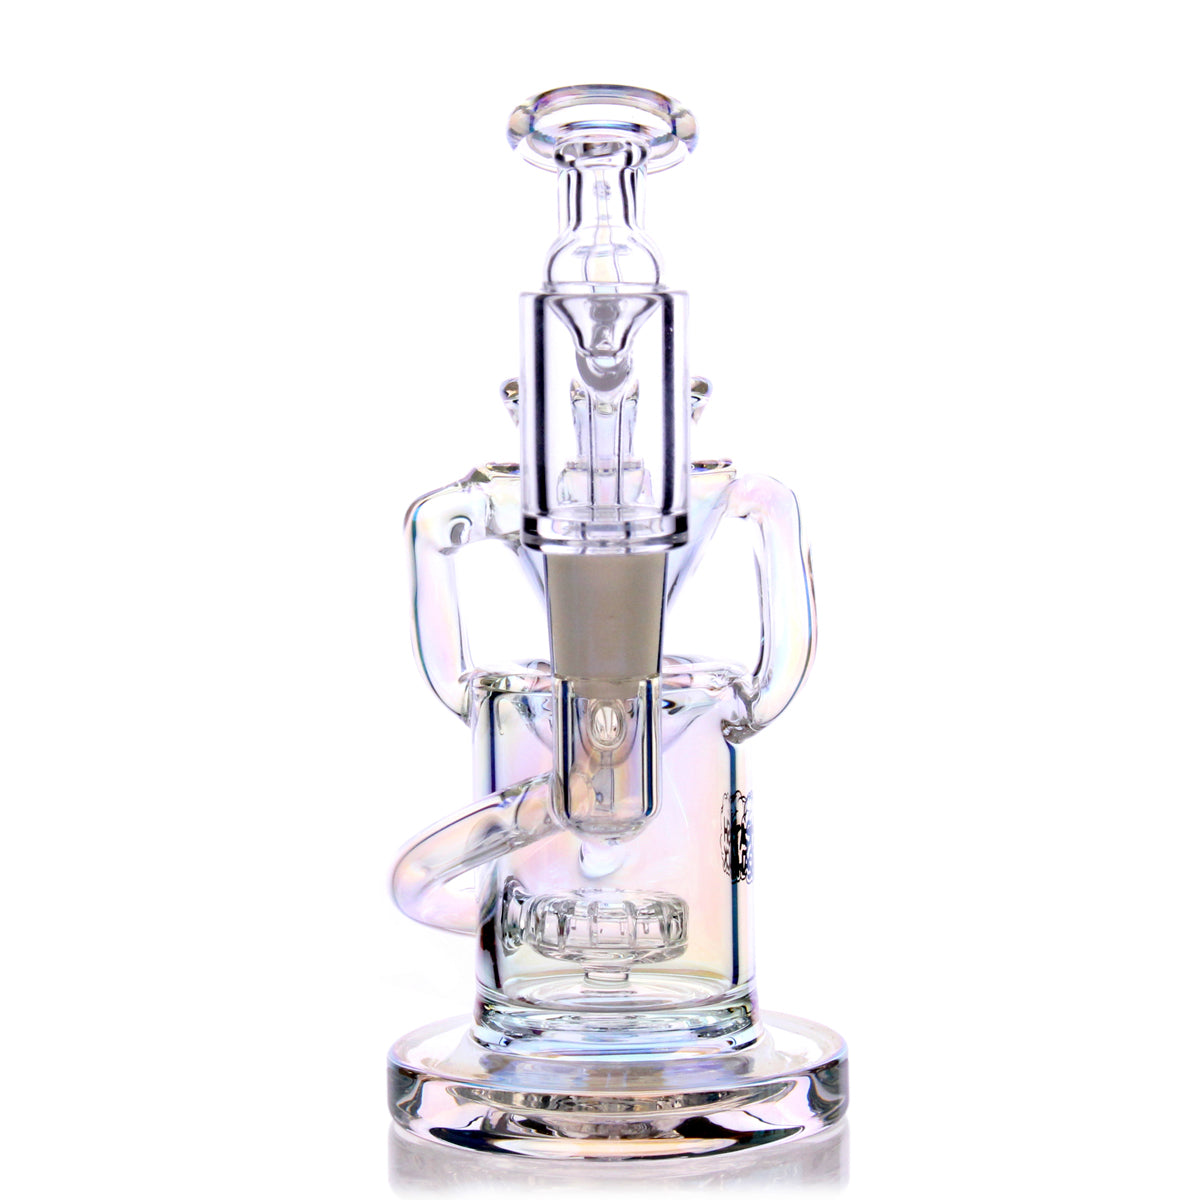 Desert Rose Mini Rig by The Stash Shack, compact 5.5" with showerhead percolator, front view on white